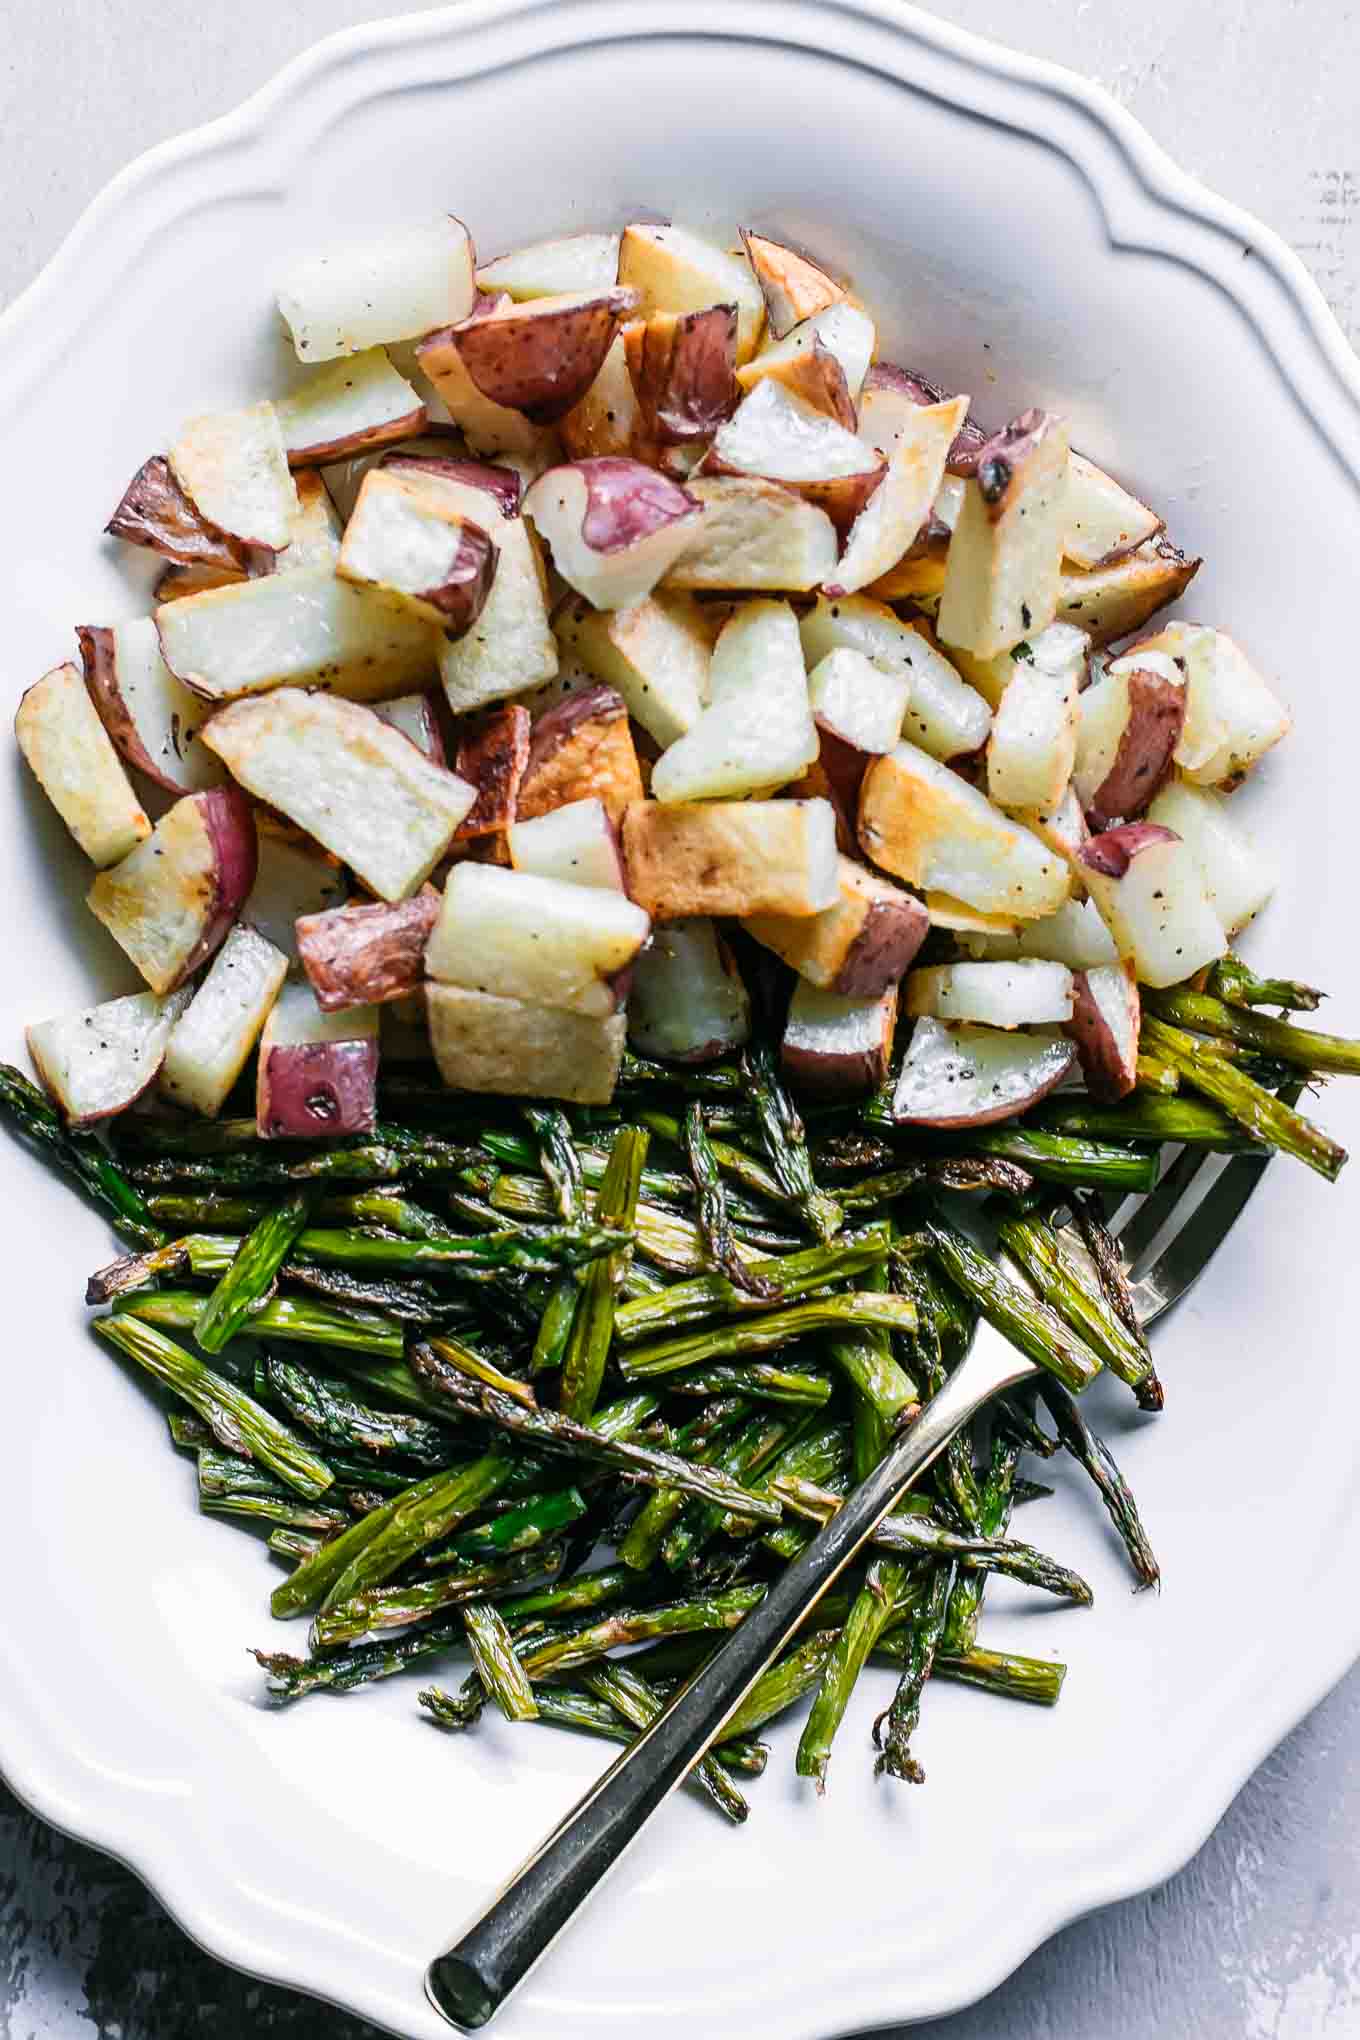 a close up photo of roasted potatoes and baked asparagus